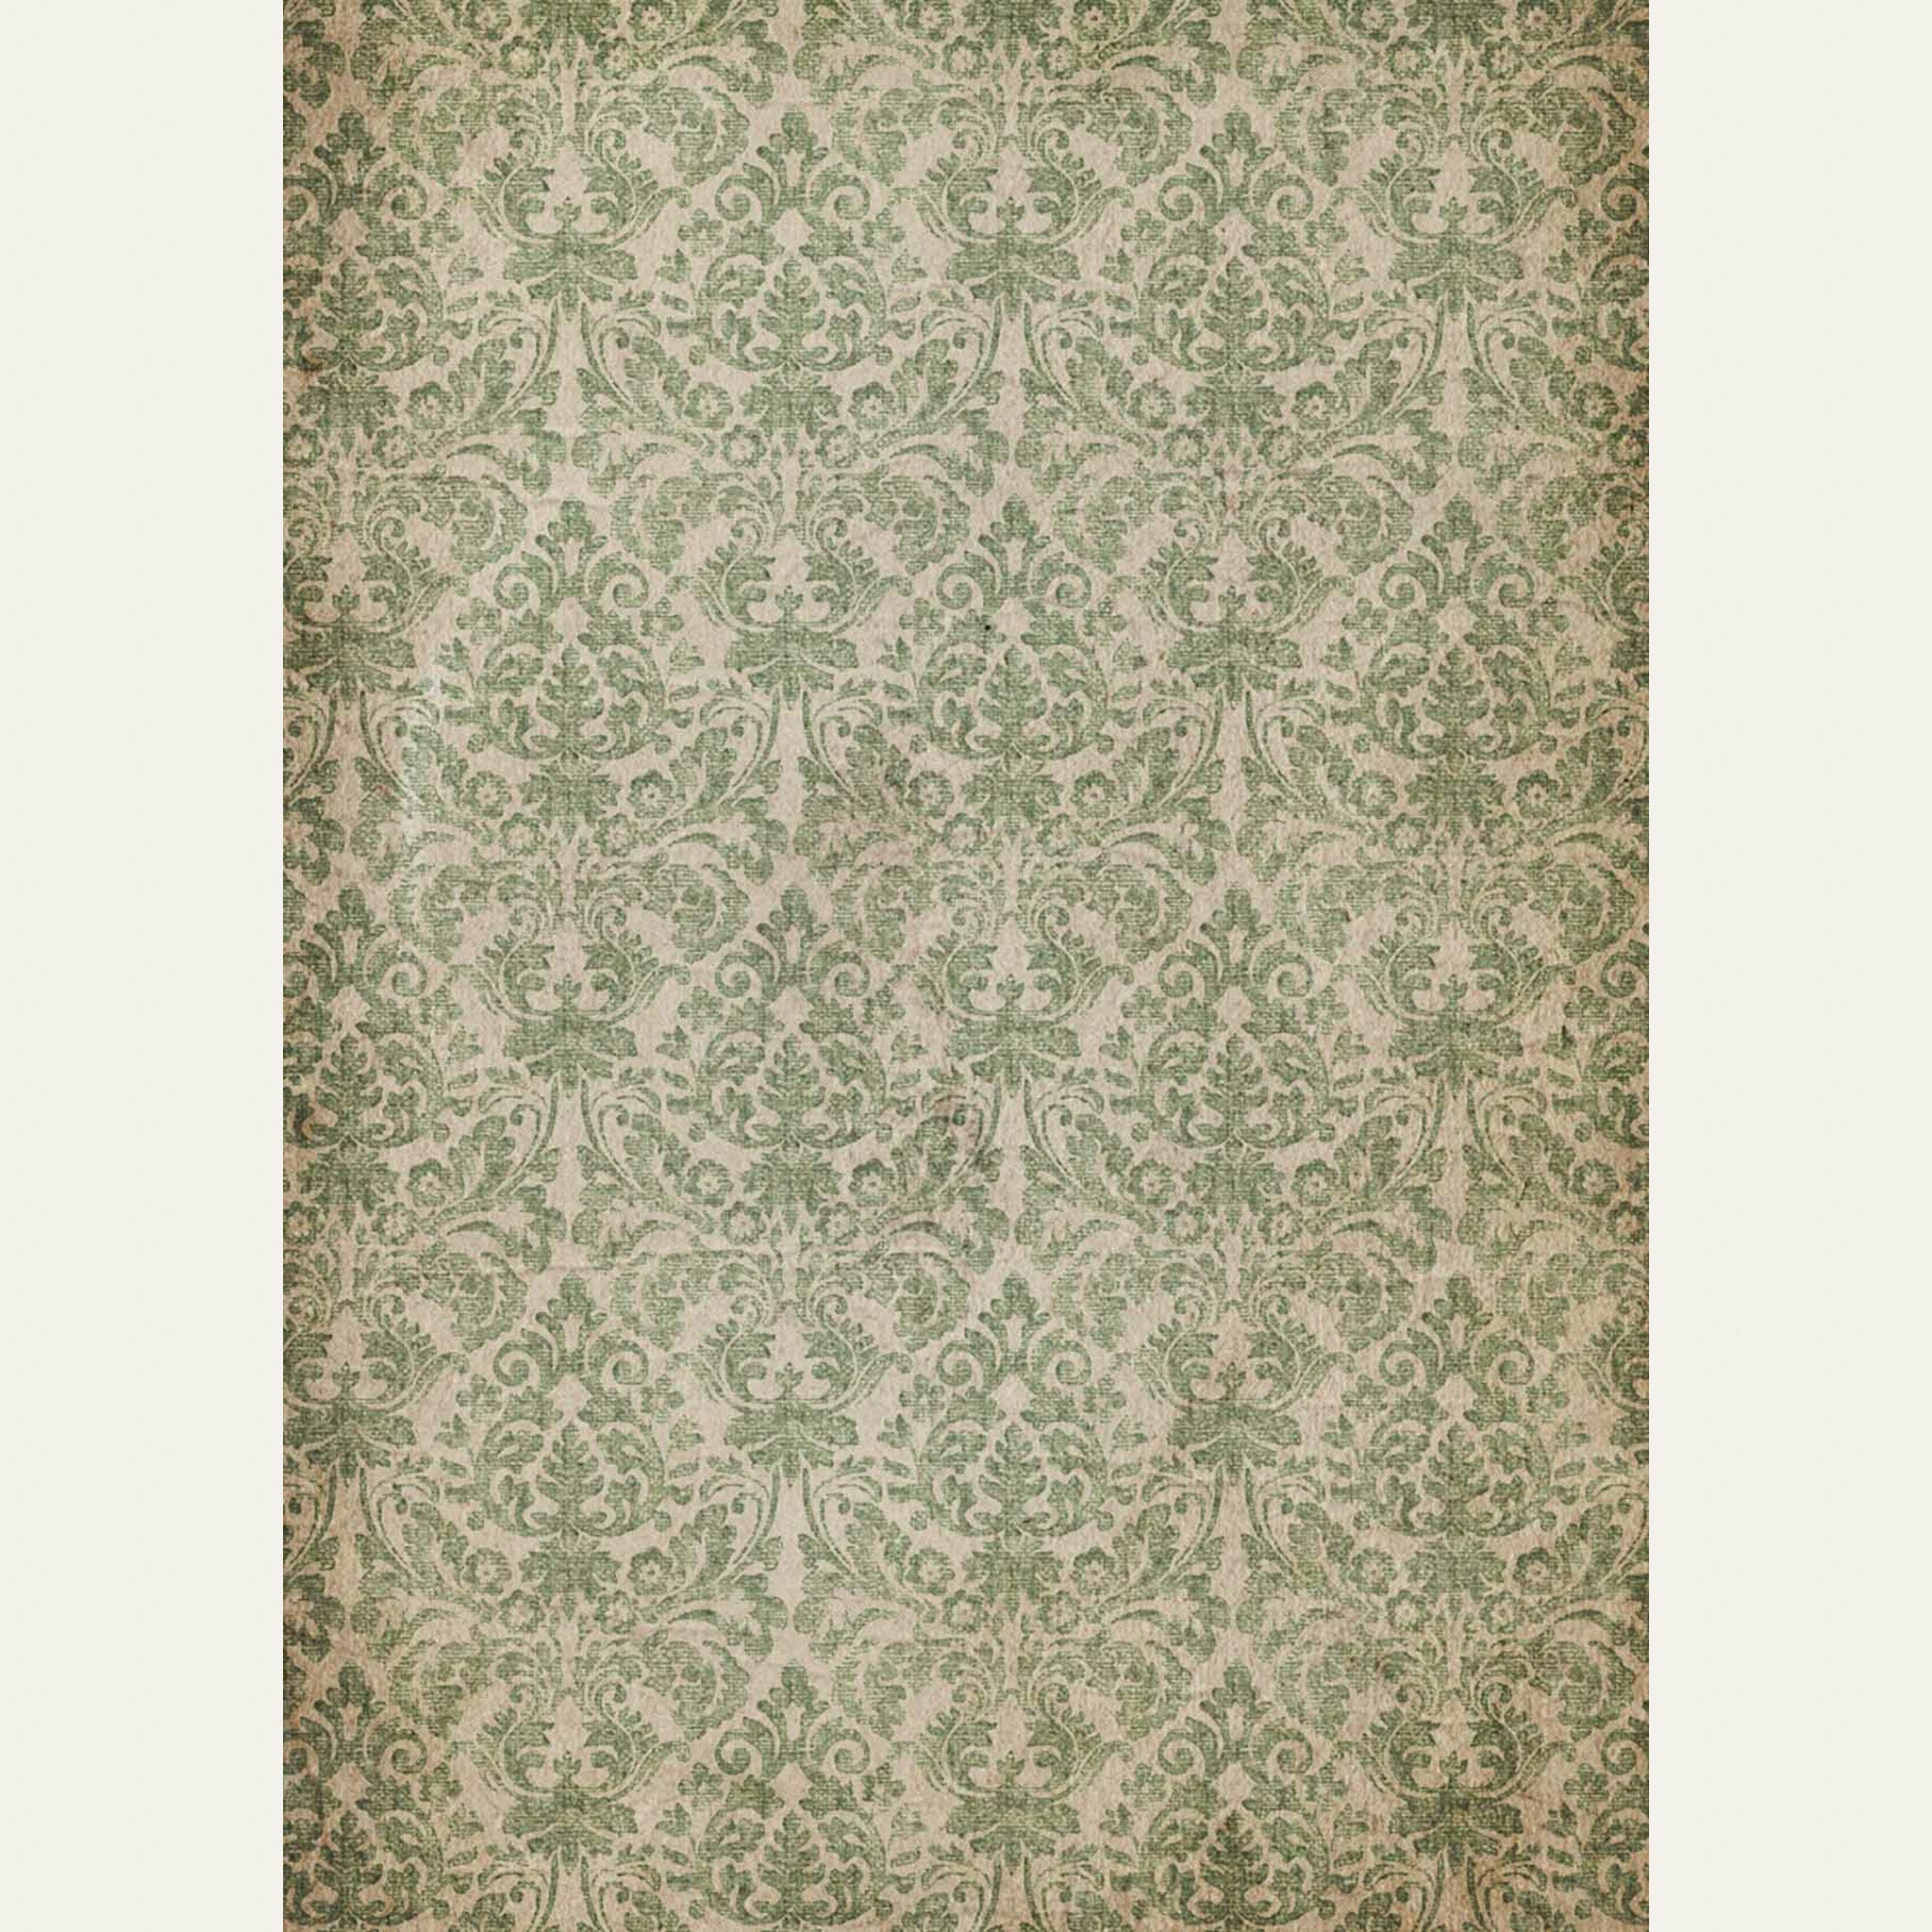 Vintage style Wallpaper Damask A2 Decoupage Rice Paper. White borders on the sides.